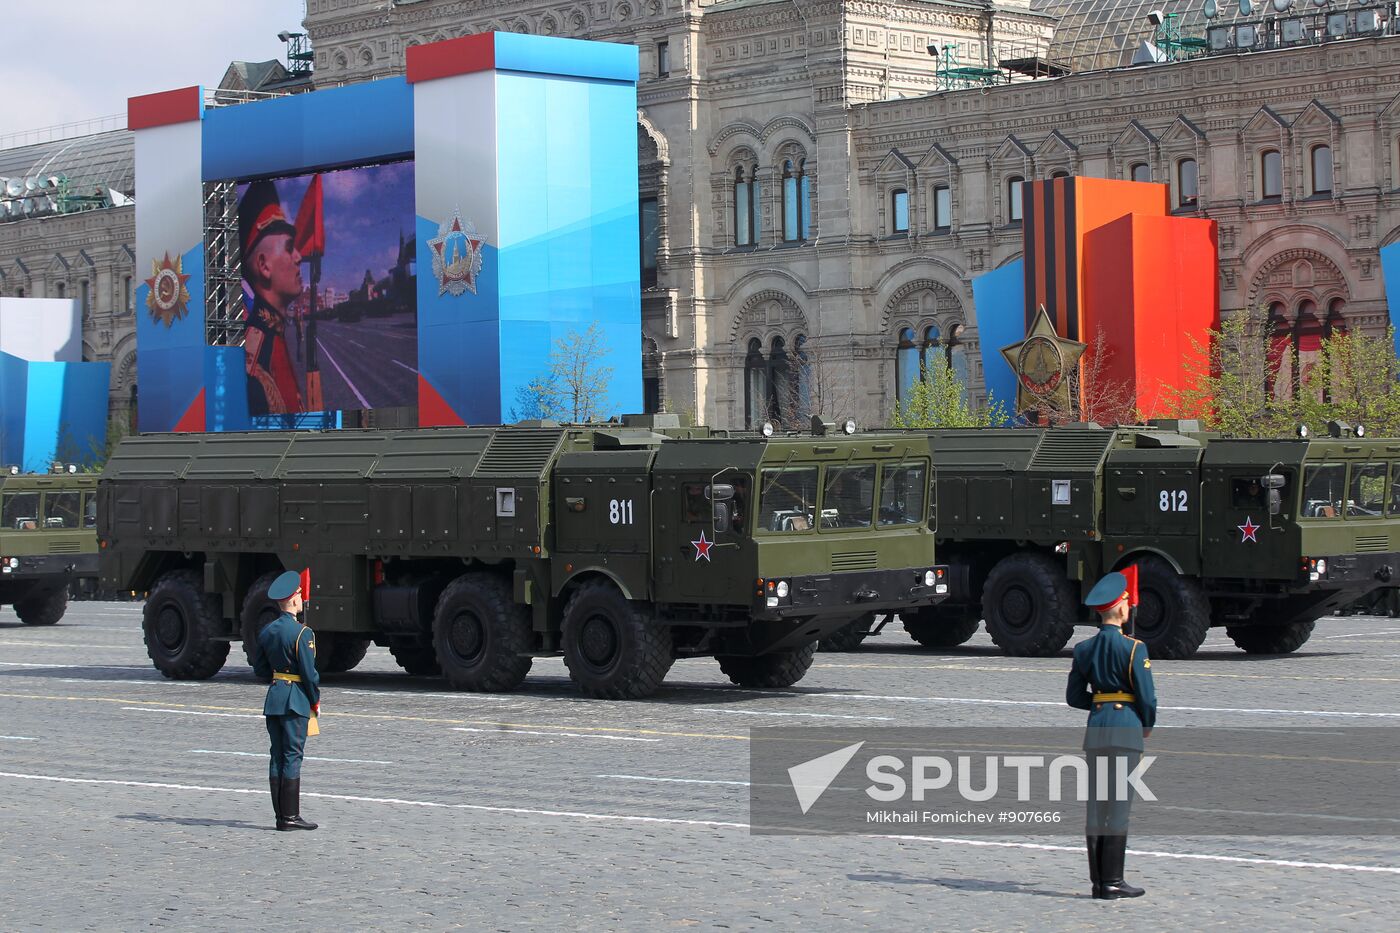 Victory Parade's general rehearsal on Red Square